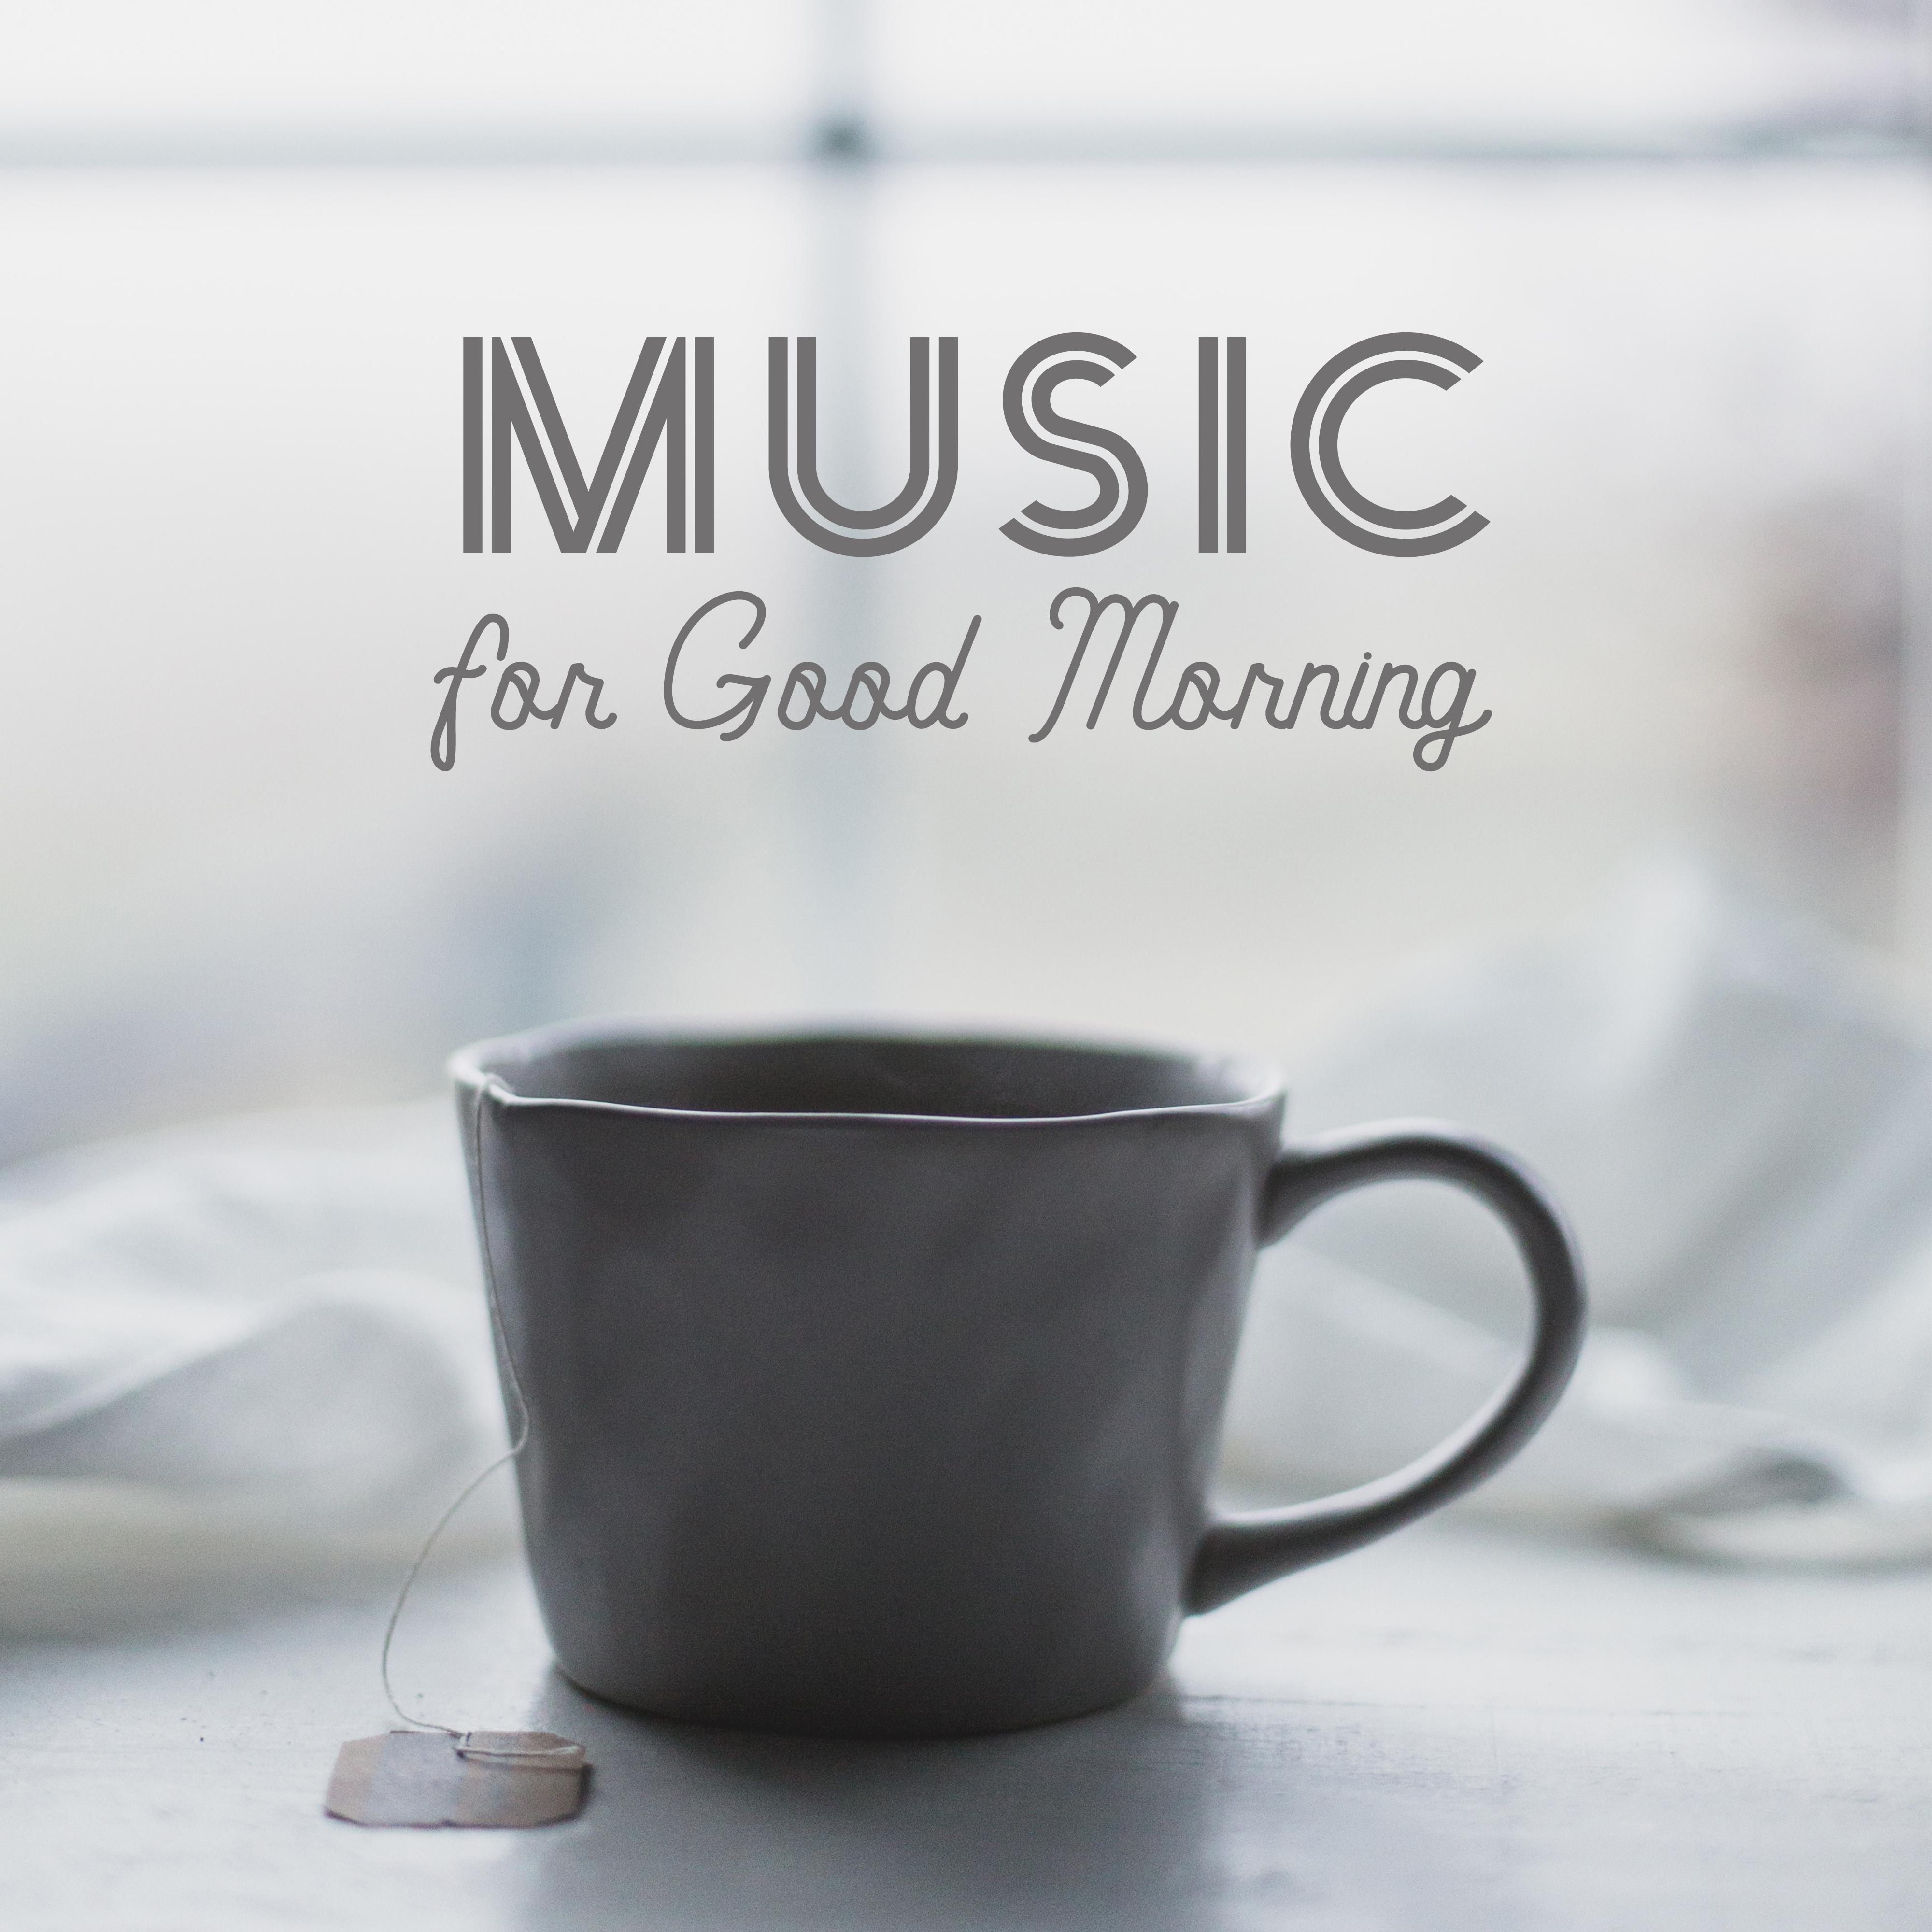 Music for Good Morning (Morning Collection of Instrumental Jazz Music)